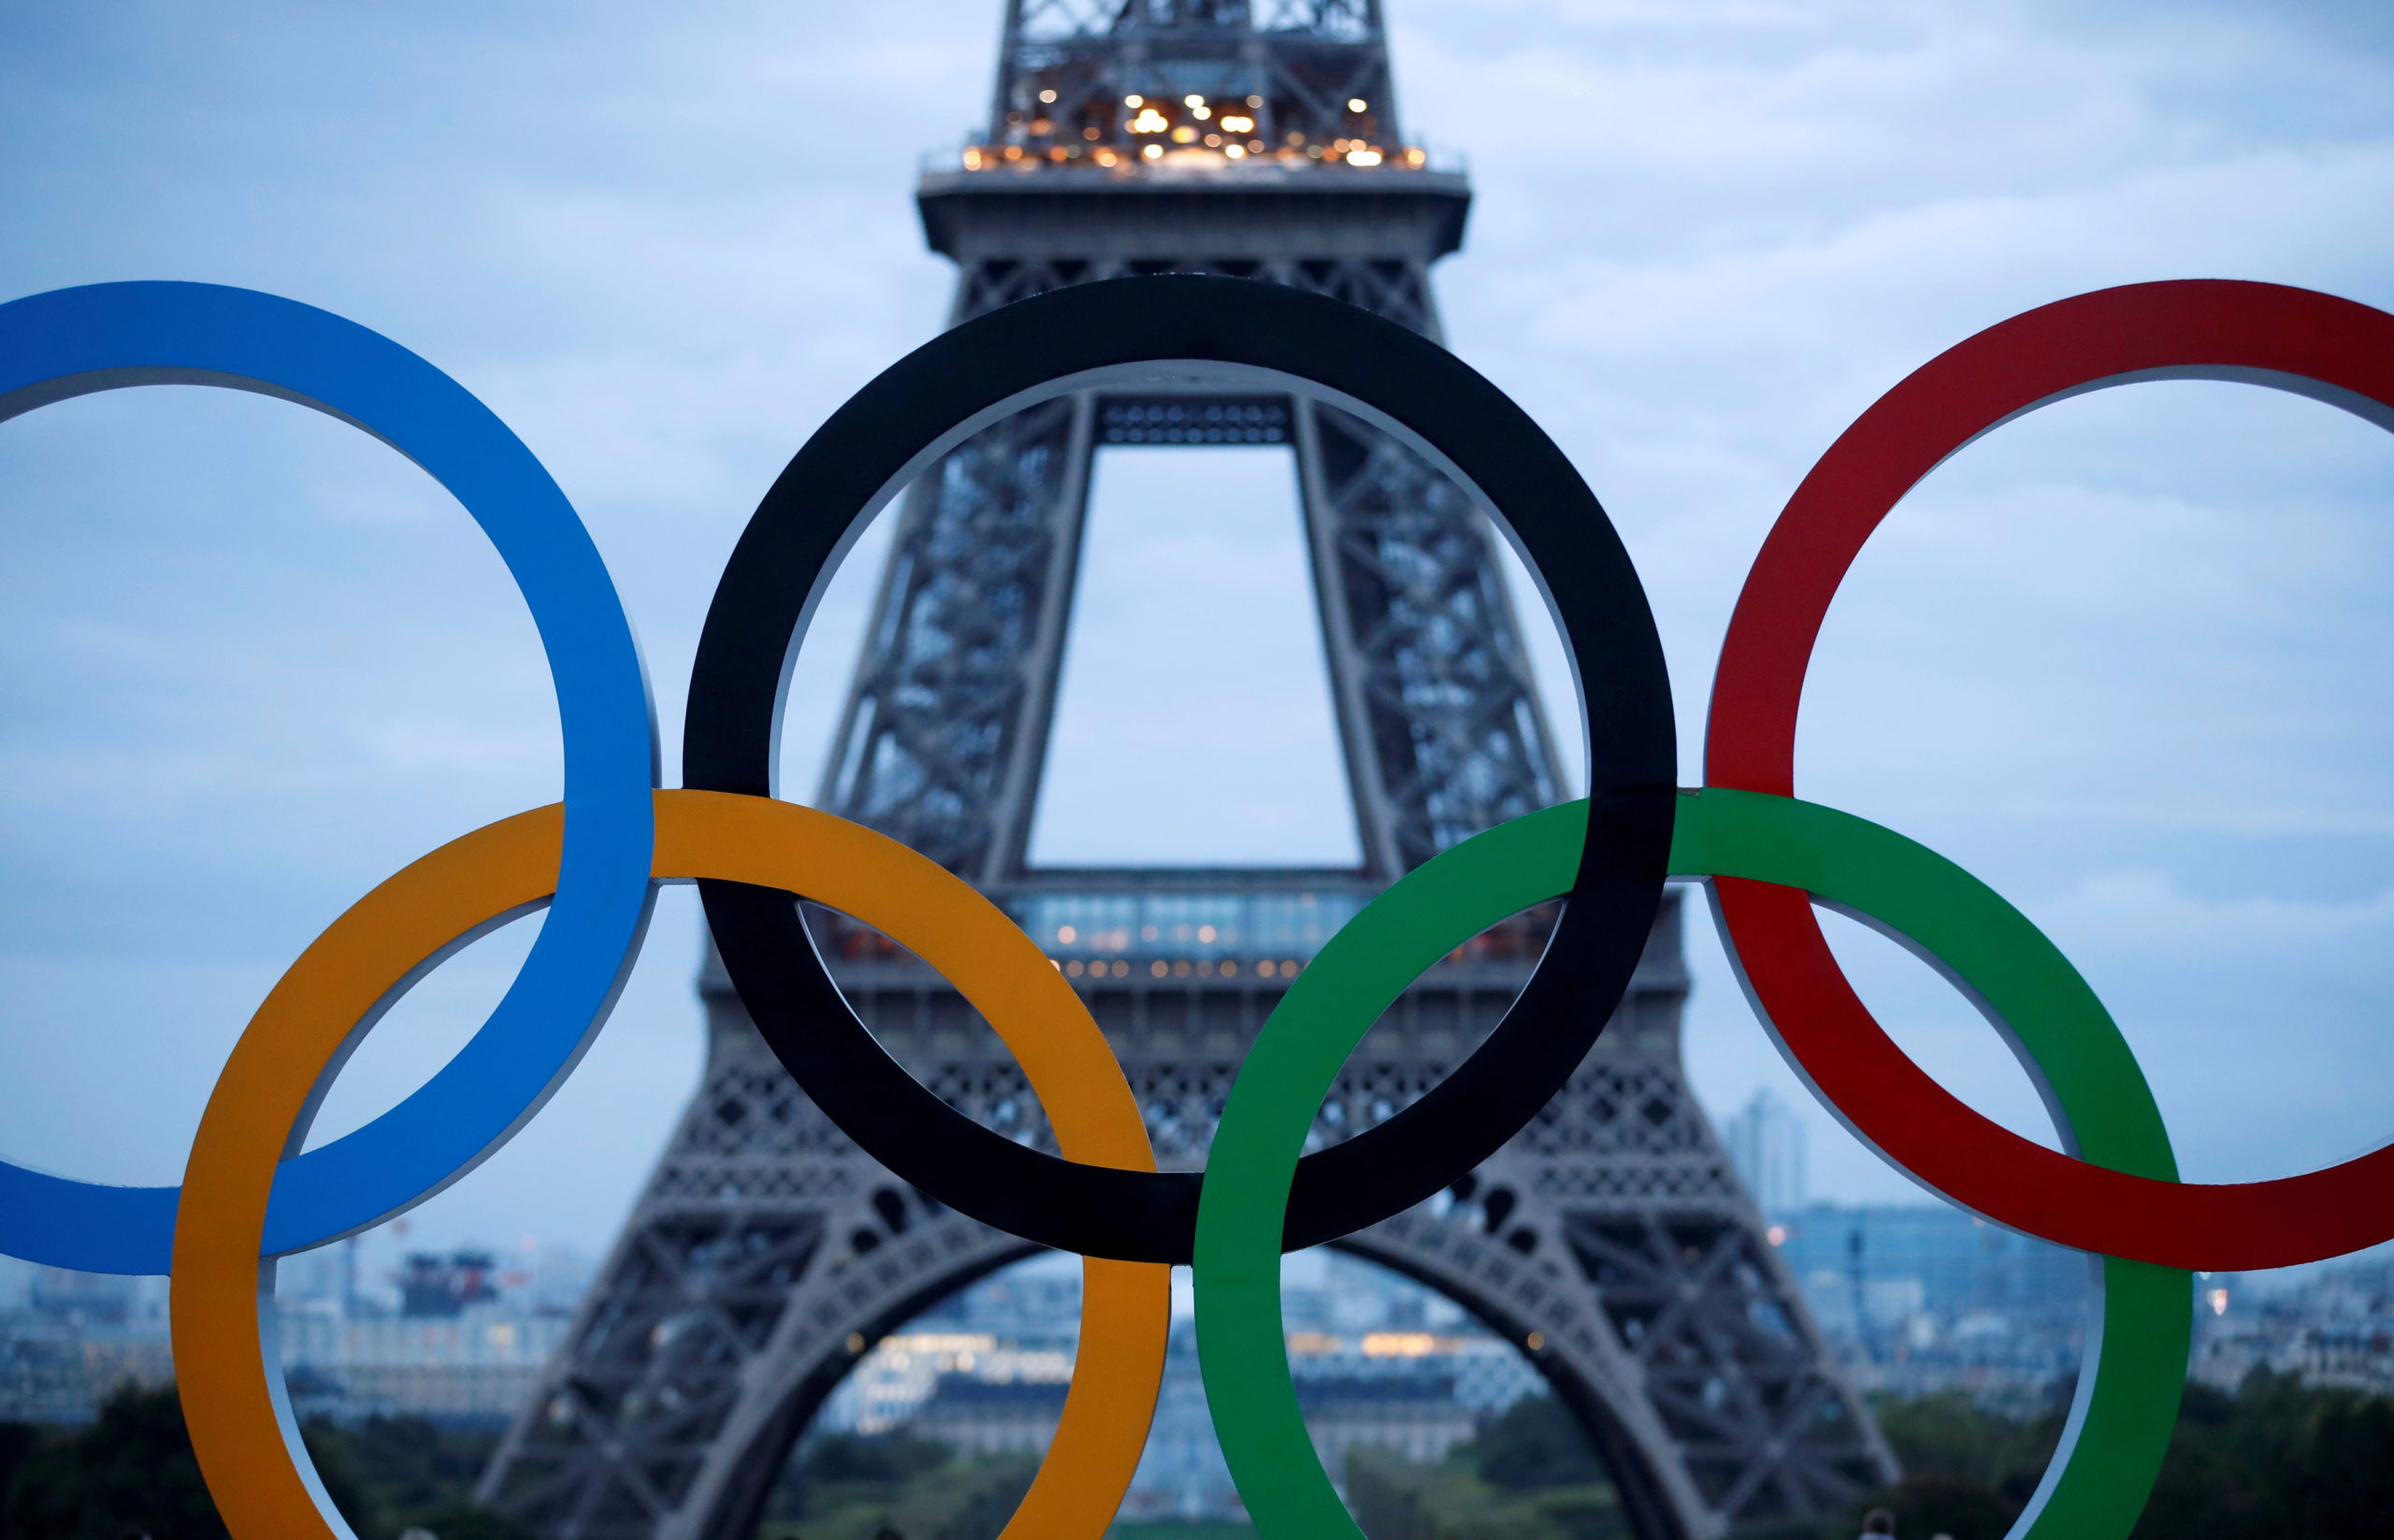 Paris 2024 lauds Tokyo for pulling off Olympics amid pandemic